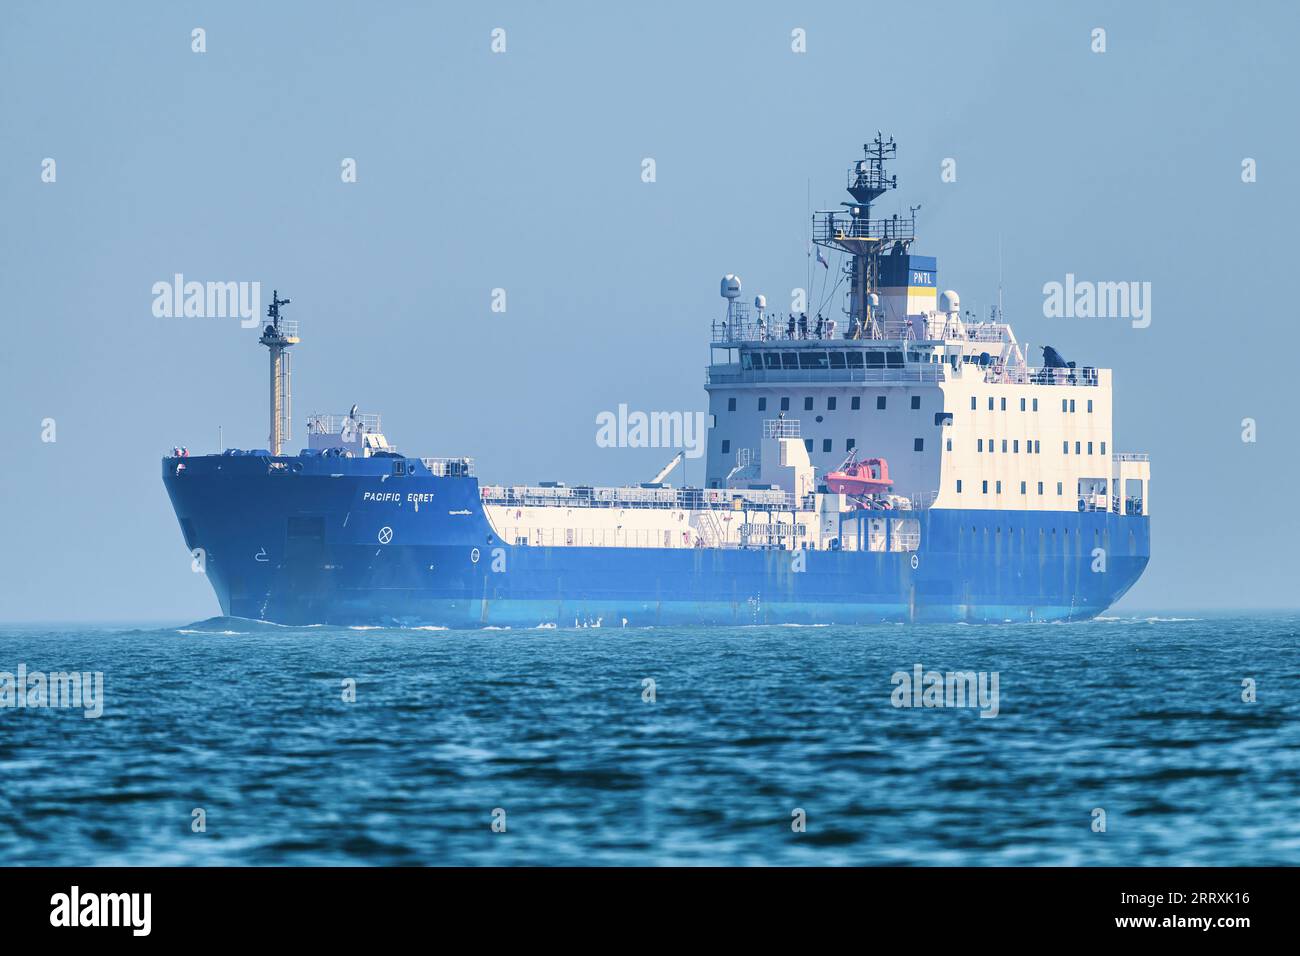 Pacific Egret is a specialist nuclear transport ship operated by Pacific Nuclear Transport Limited (PNTL). Stock Photo